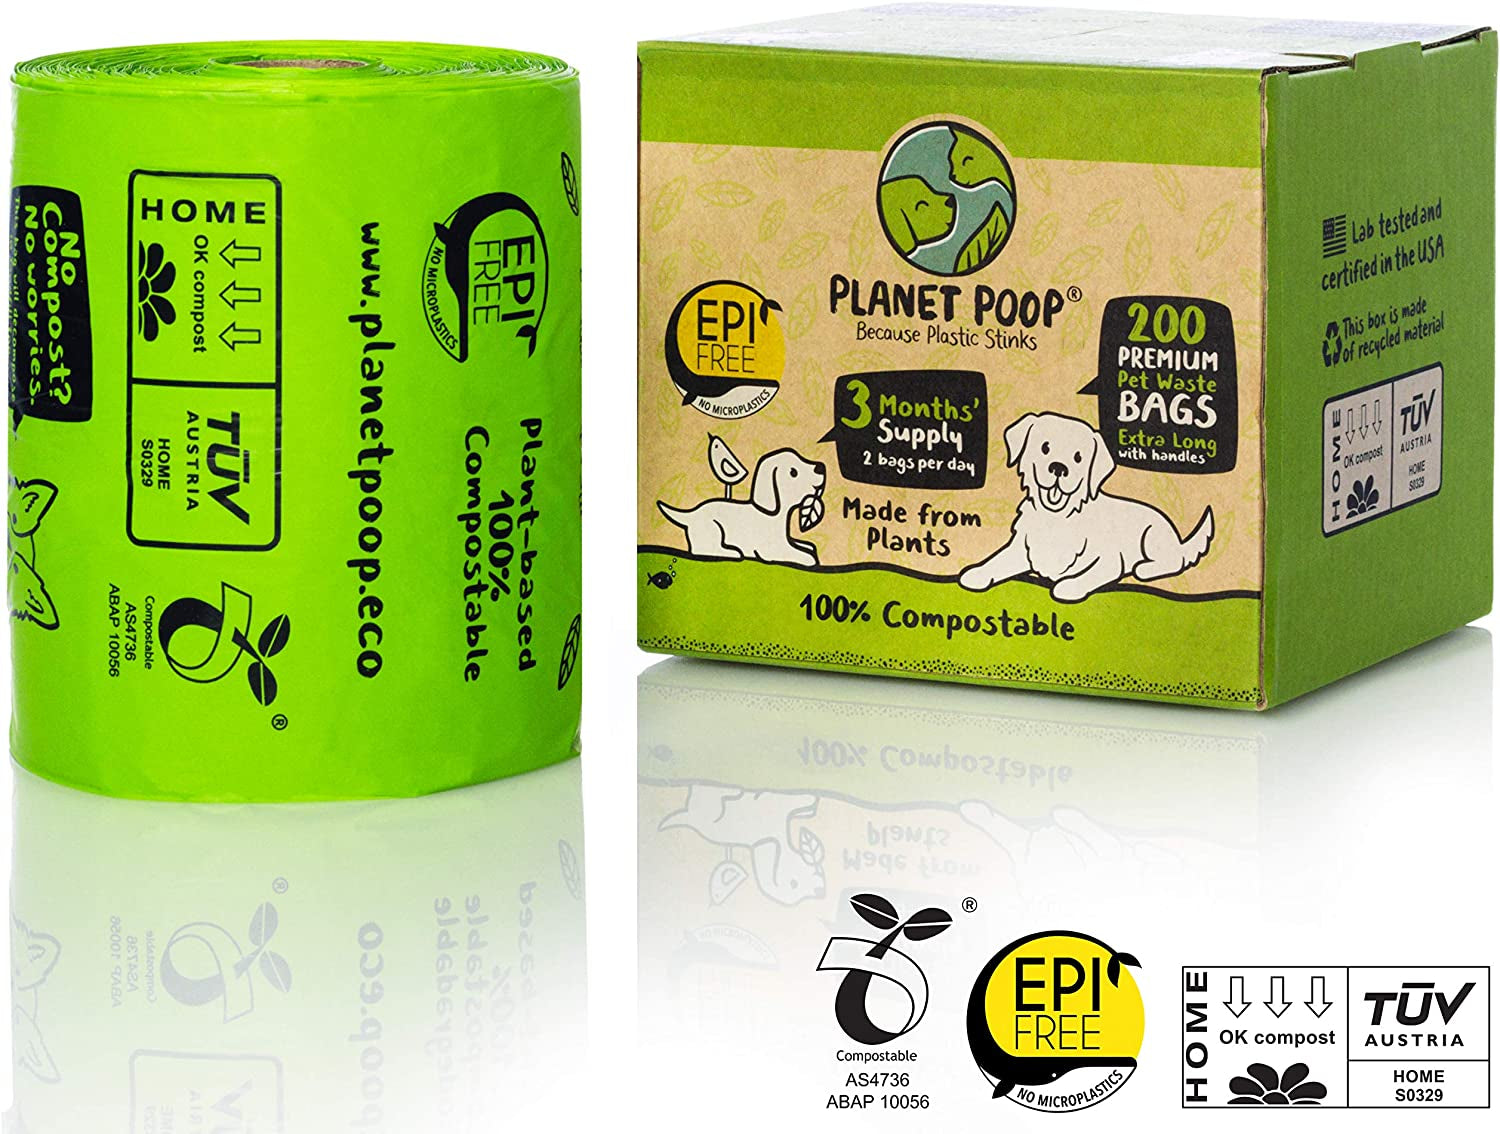 Home Compostable Dog Poop Bags Extra Long with Handles | Large Single Roll 200 Grab & Go | Un-Scented Dog Waste Bag | Leakproof Doggy & Cat Bags | Plant-Based Pet Supplies